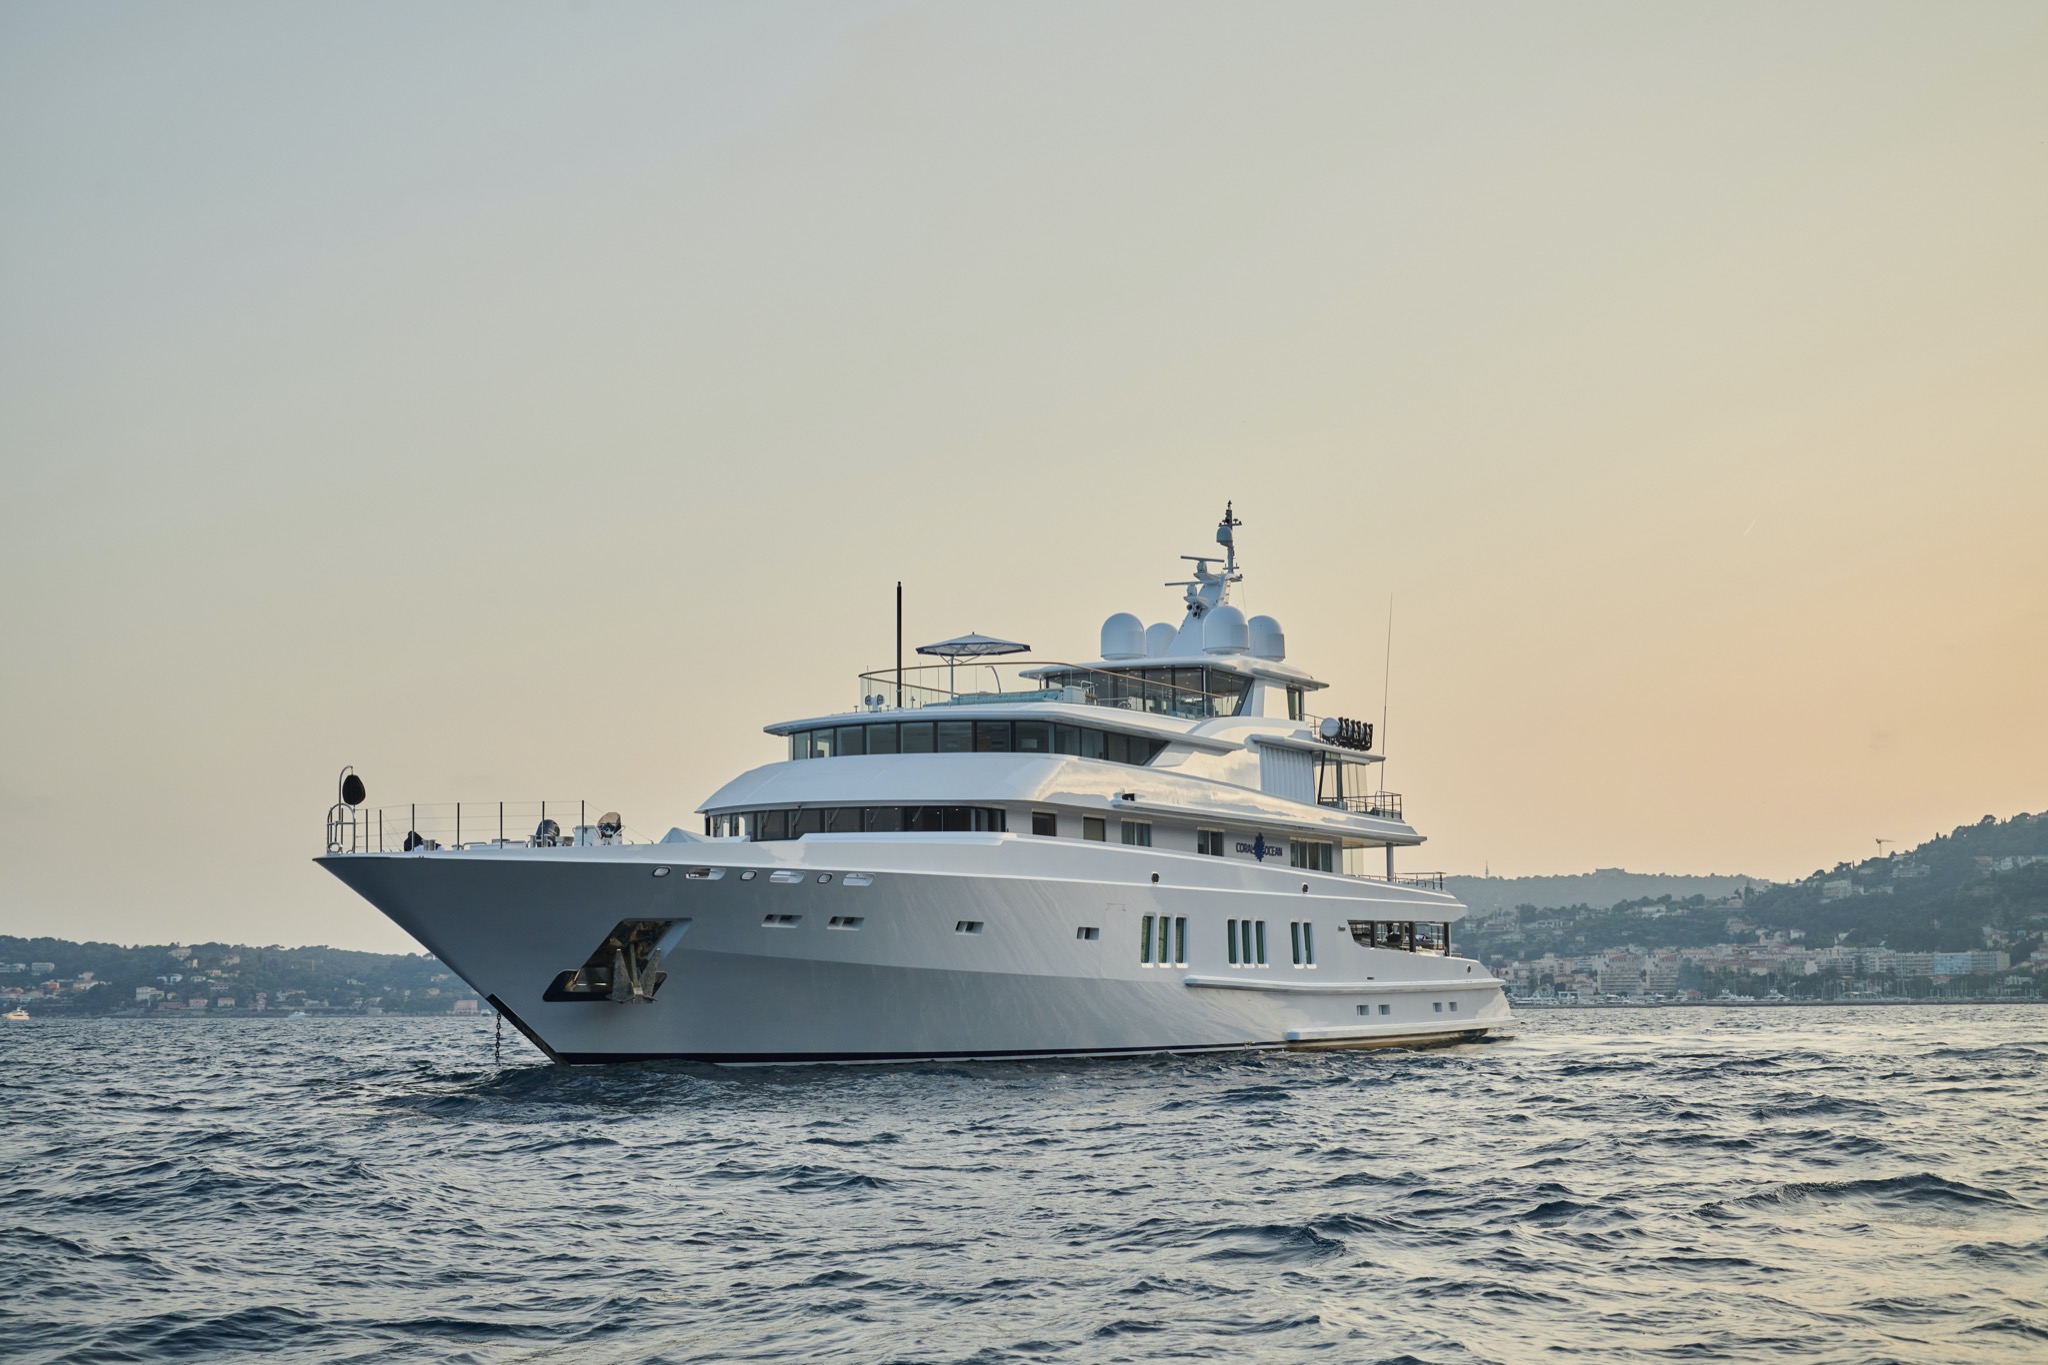 MEET THE MOST ICONIC SUPERYACHT REBORN & READY TO BE CHARTERED.